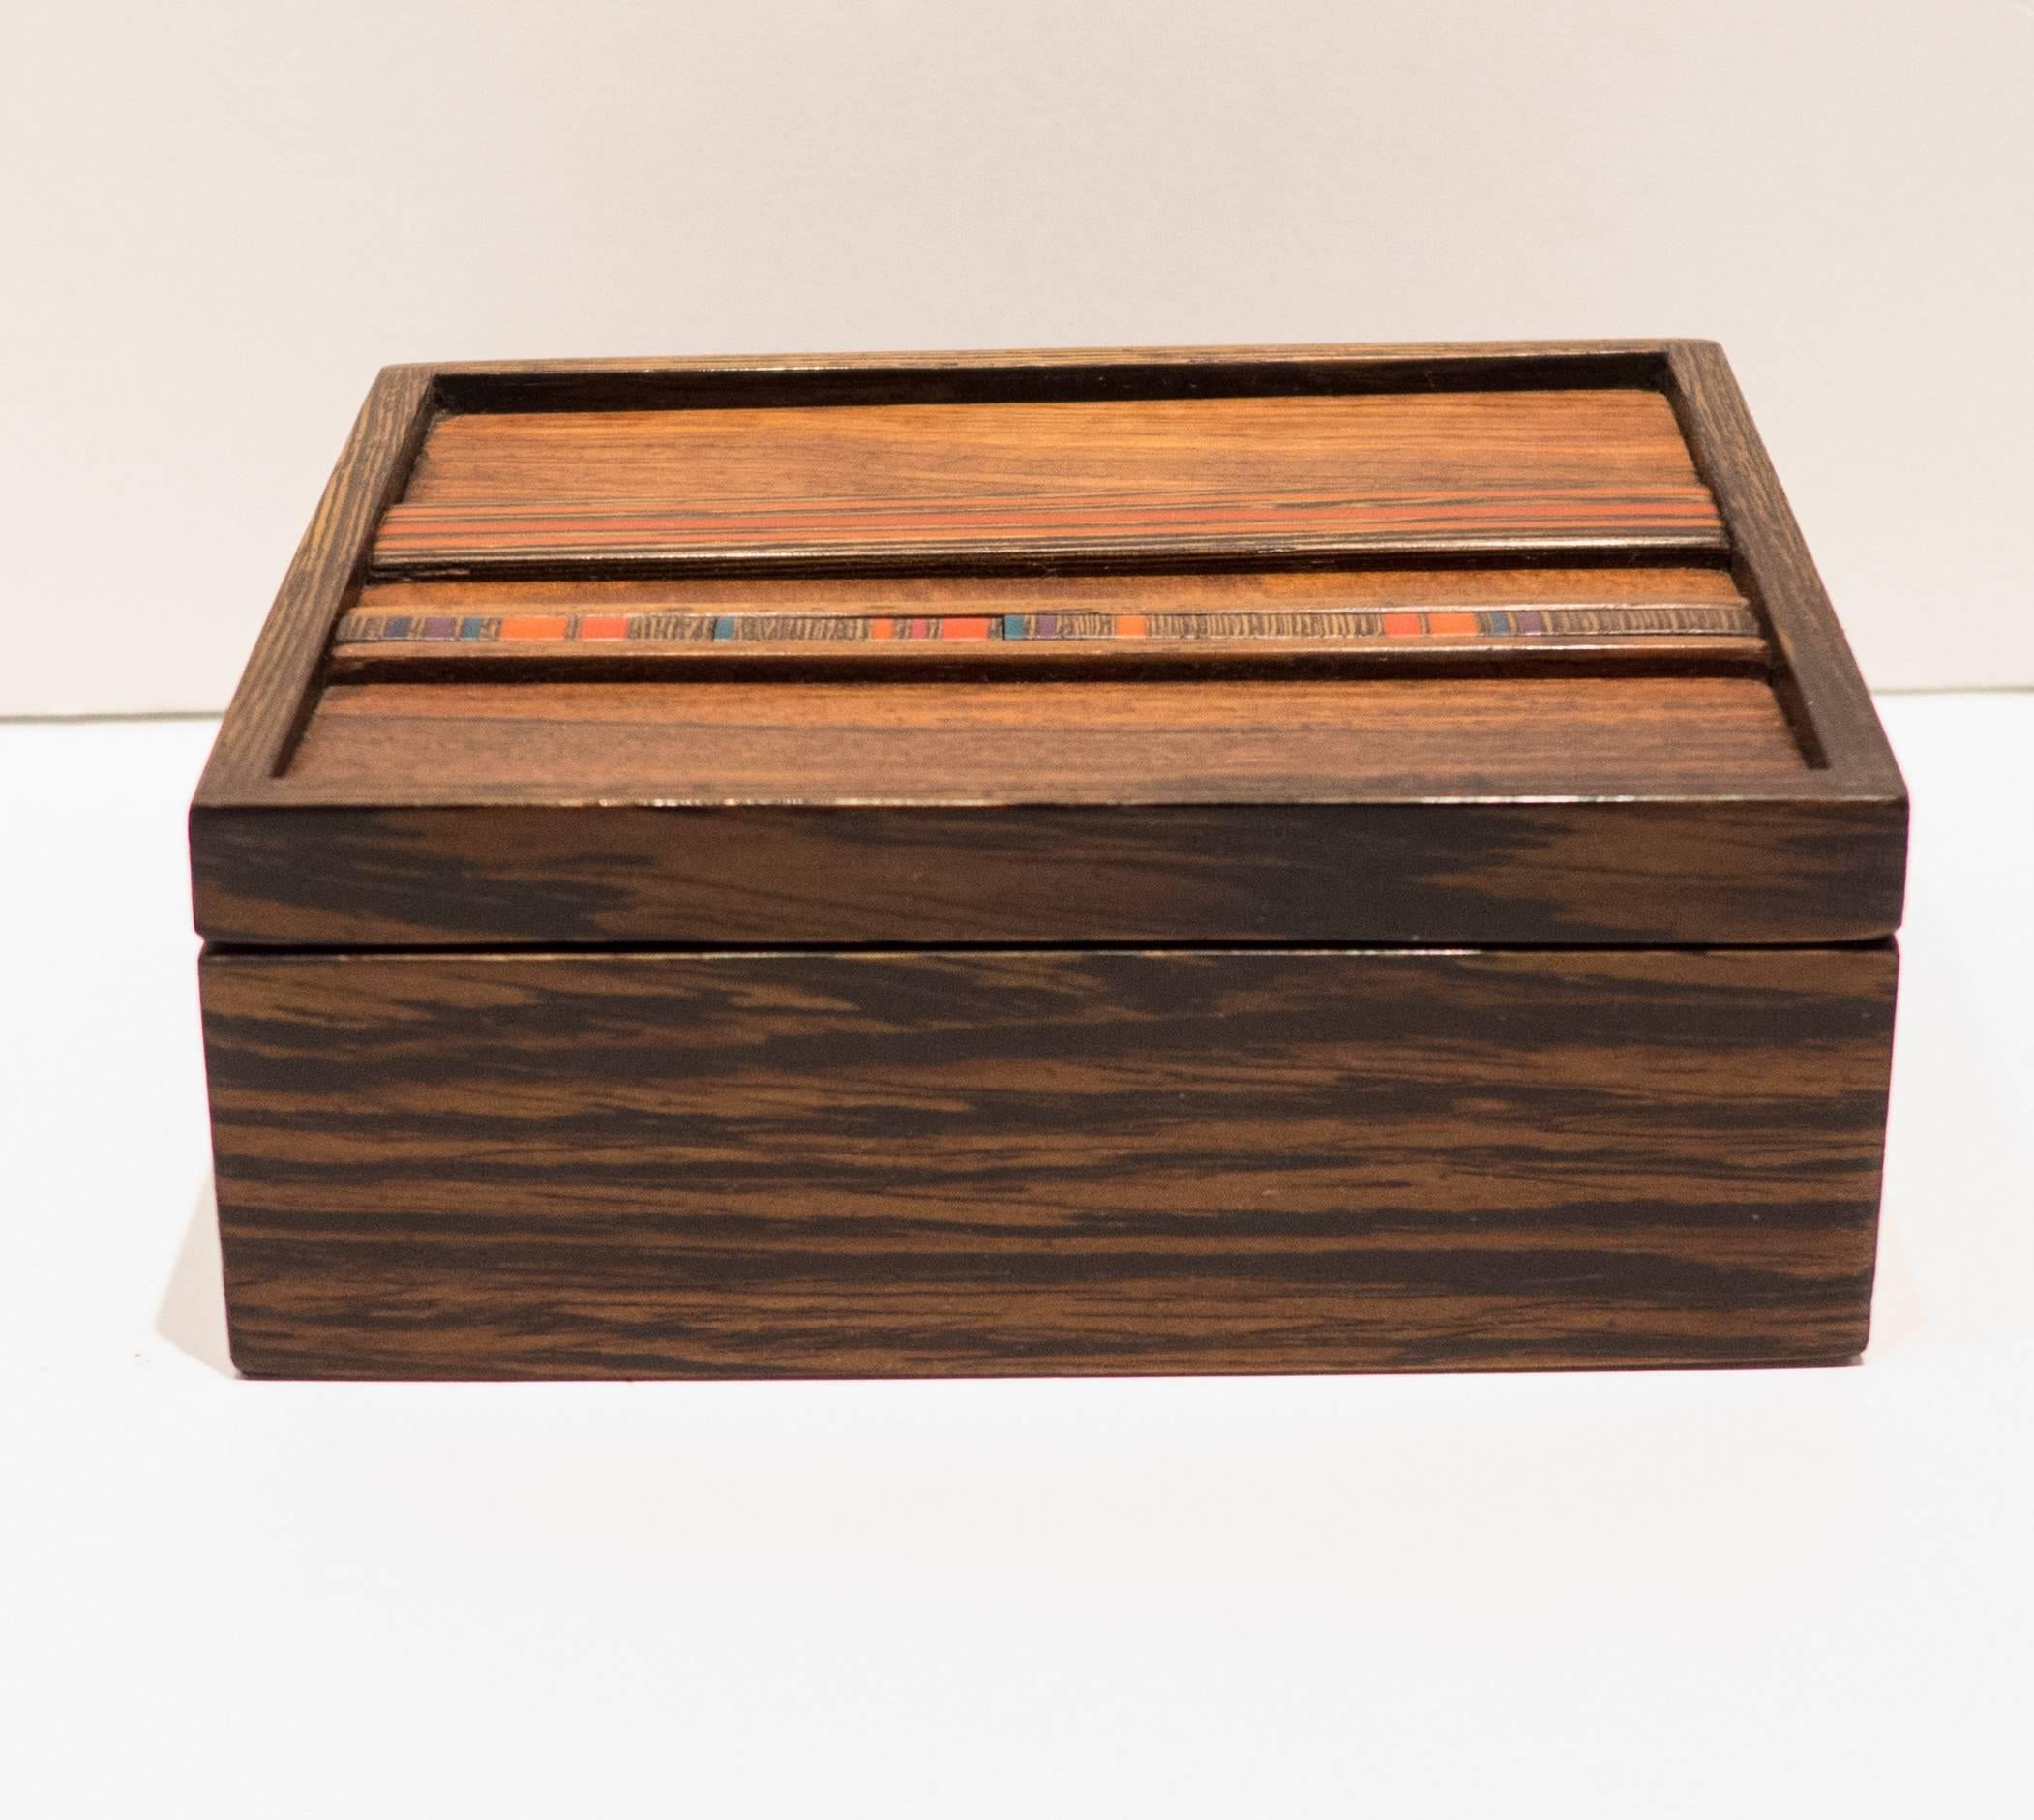 Wooden lidded box with two bands of multi-color resin inlay. By San Francisco Bay artisan Robert McKeown (1931-1989). A graduate of the California College of Arts & Crafts, McKeown was a color theorist and woodworker who won acclaim for his